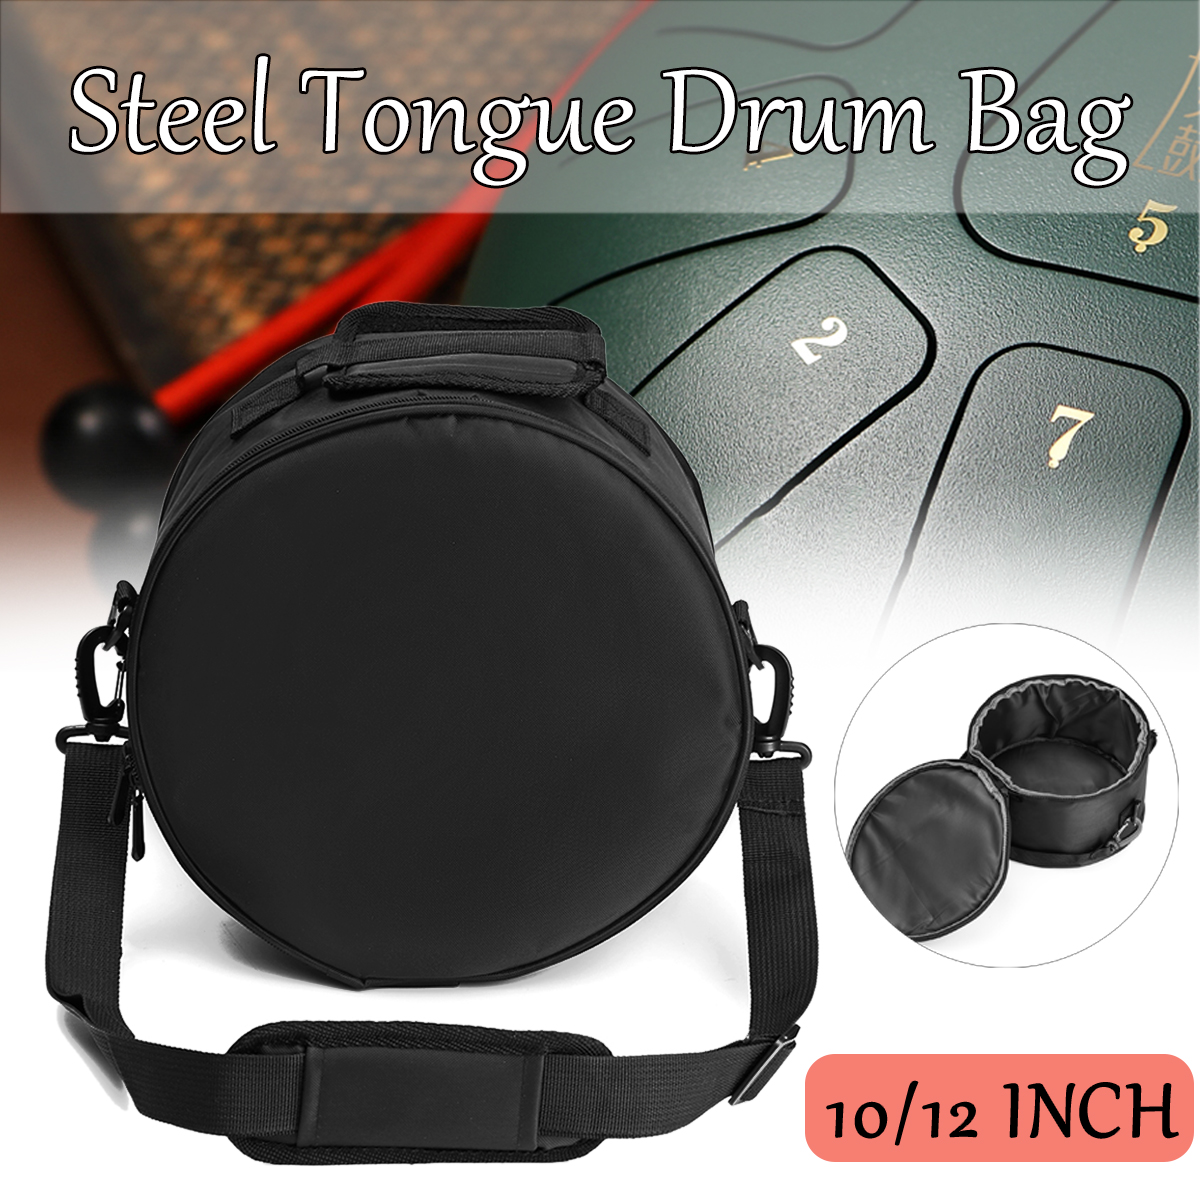 Steel-Tongue-Drum-Bag-Storage-Punch-Soulder-Crossbody-Bag-For-Outdoor-Camping-Leisure-Wear-1357124-2